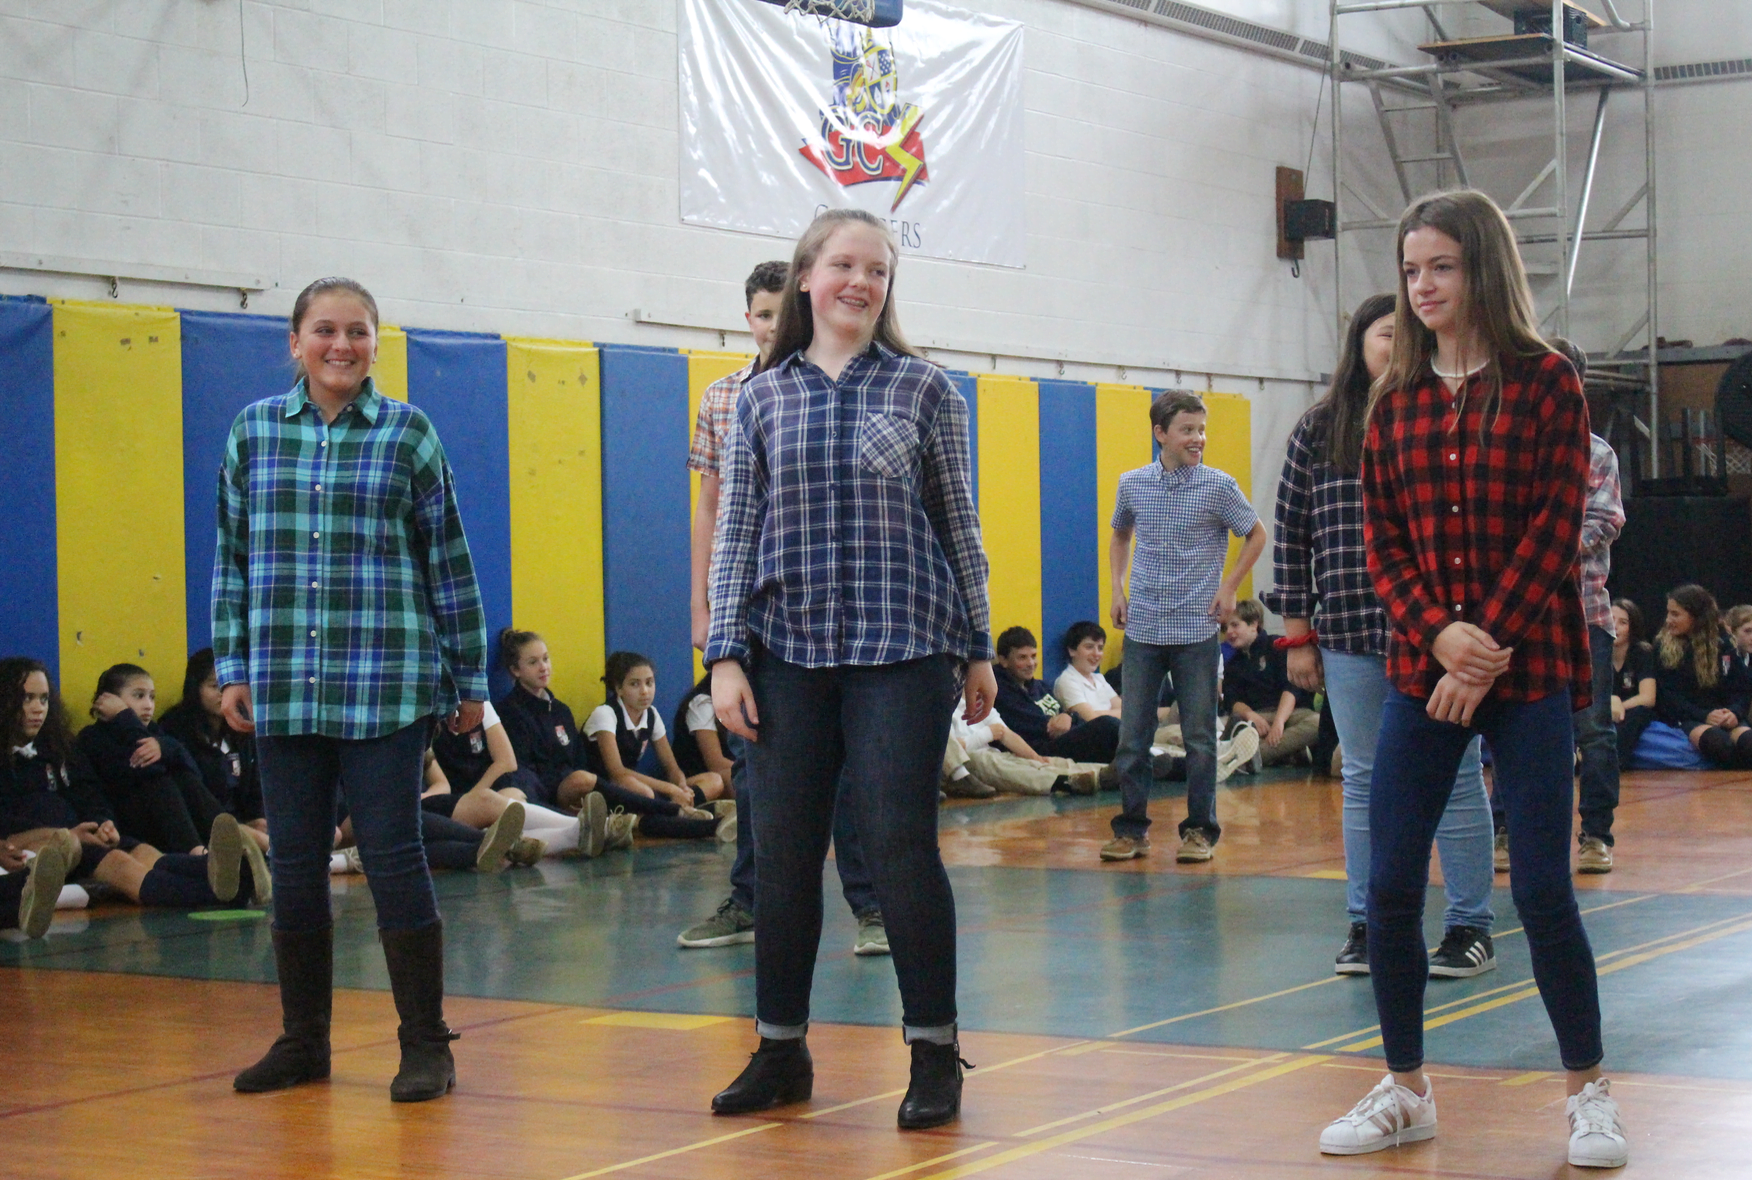 Dancing to Footloose, Greenwich Catholic School 8th graders celebrated American diversity in addition to international diversity. Oct 24, 2017 Photo: Leslie Yager